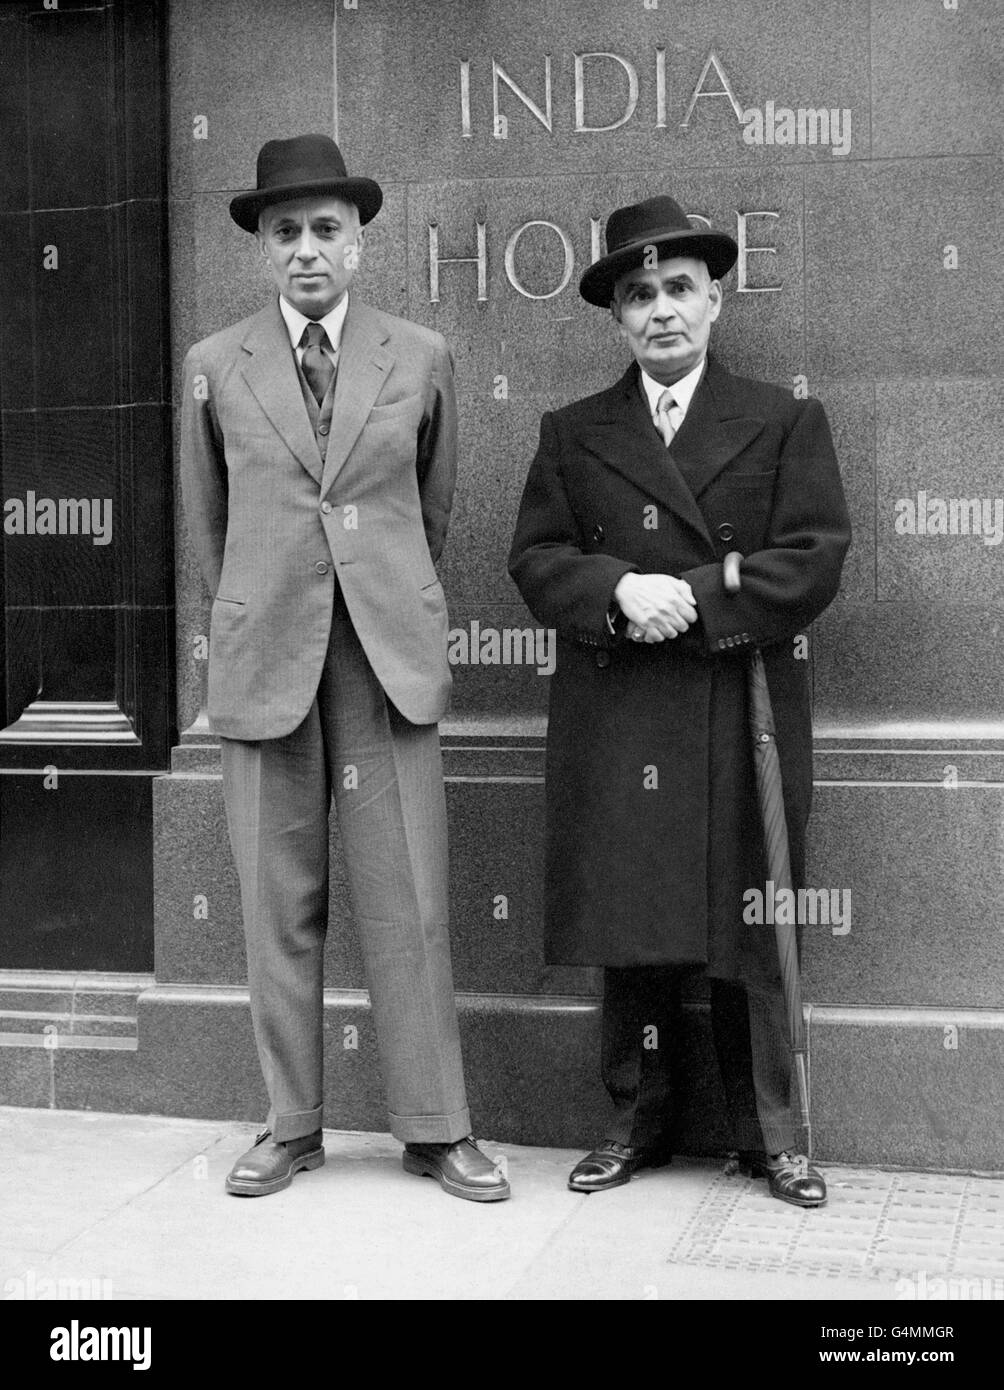 Pandit Nehru, the Indian Premier (l) with Sir Girija Shankar Bajpai, Minister of External Affairs, India, at India House, London. Pandit Nehru arrived in England late last night to attend the Empire Premiers' Conference Stock Photo